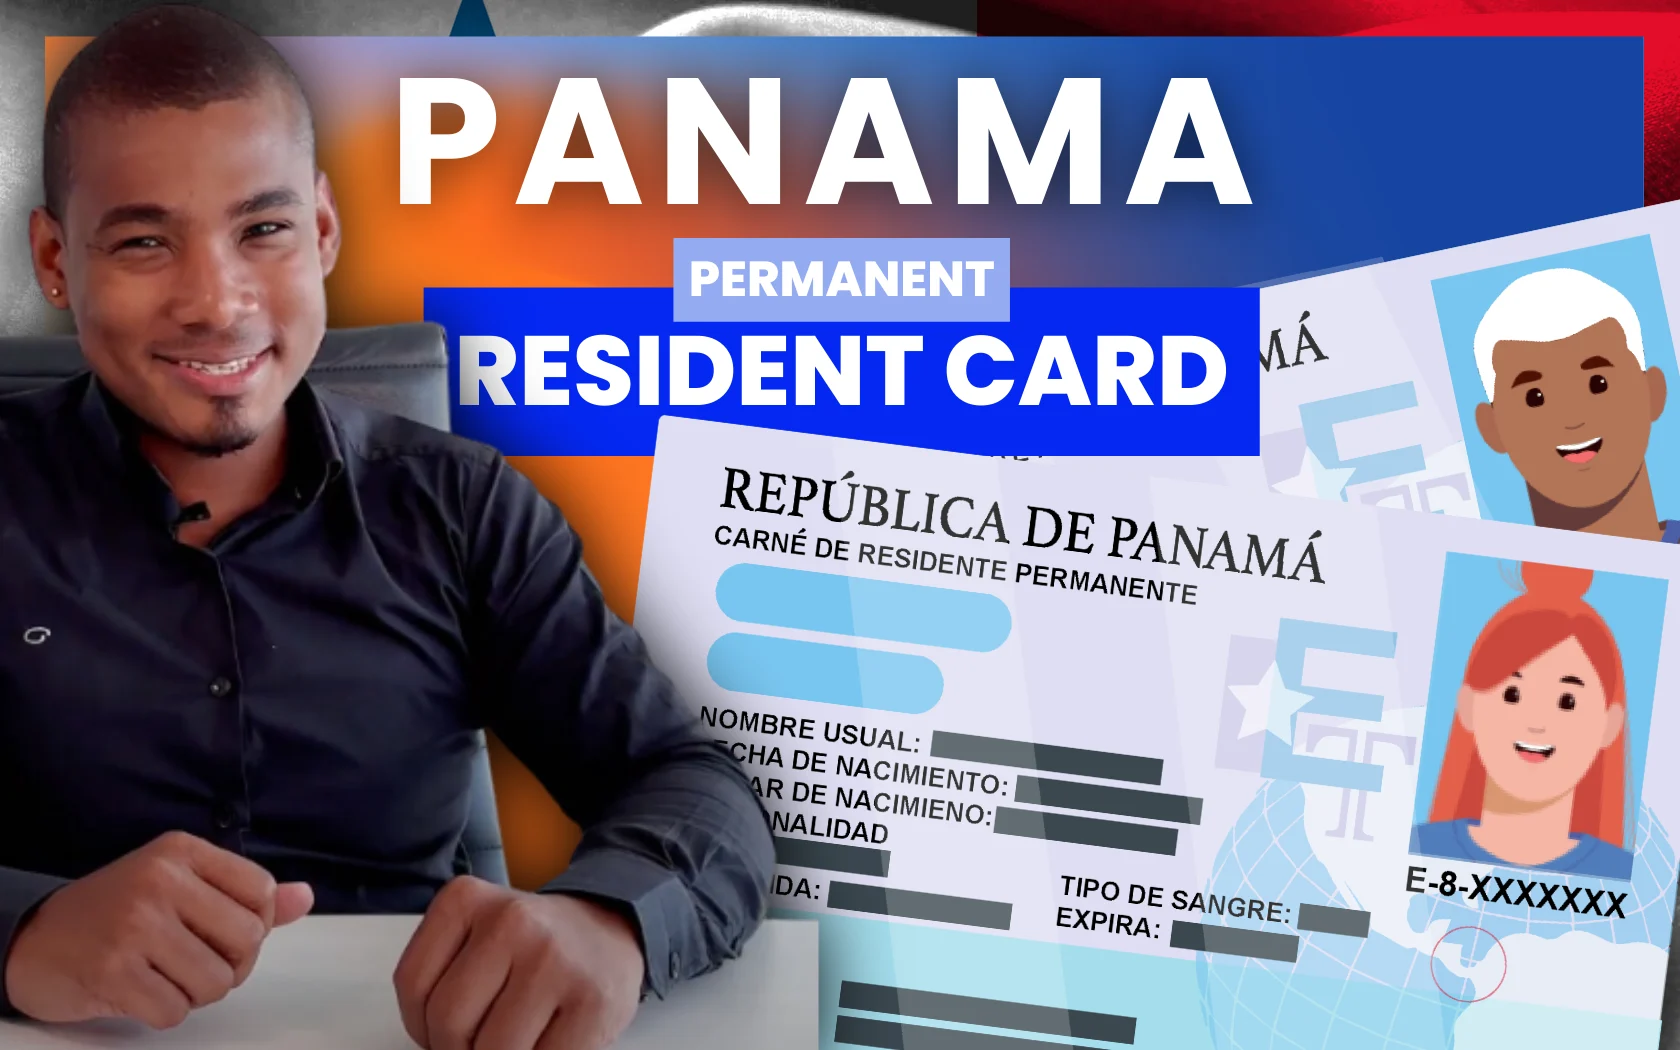 How to get the Permanent resident card in Panama